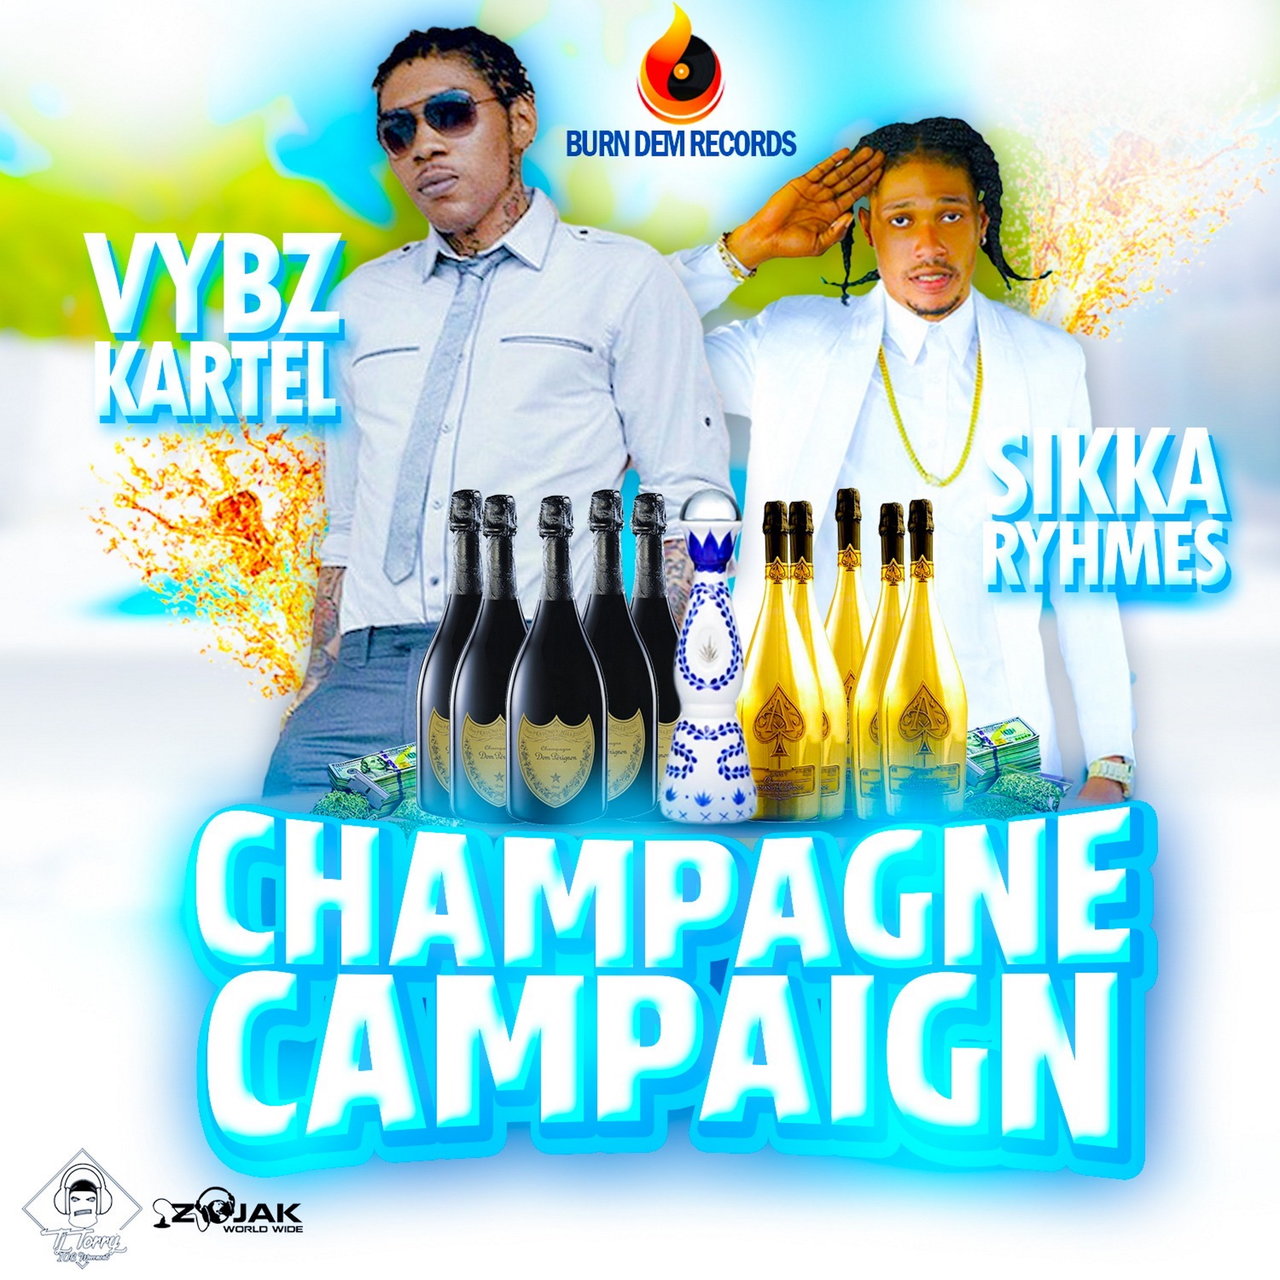 Vybz Kartel and Sikka Rymes - Champagne Campaign (Cover)